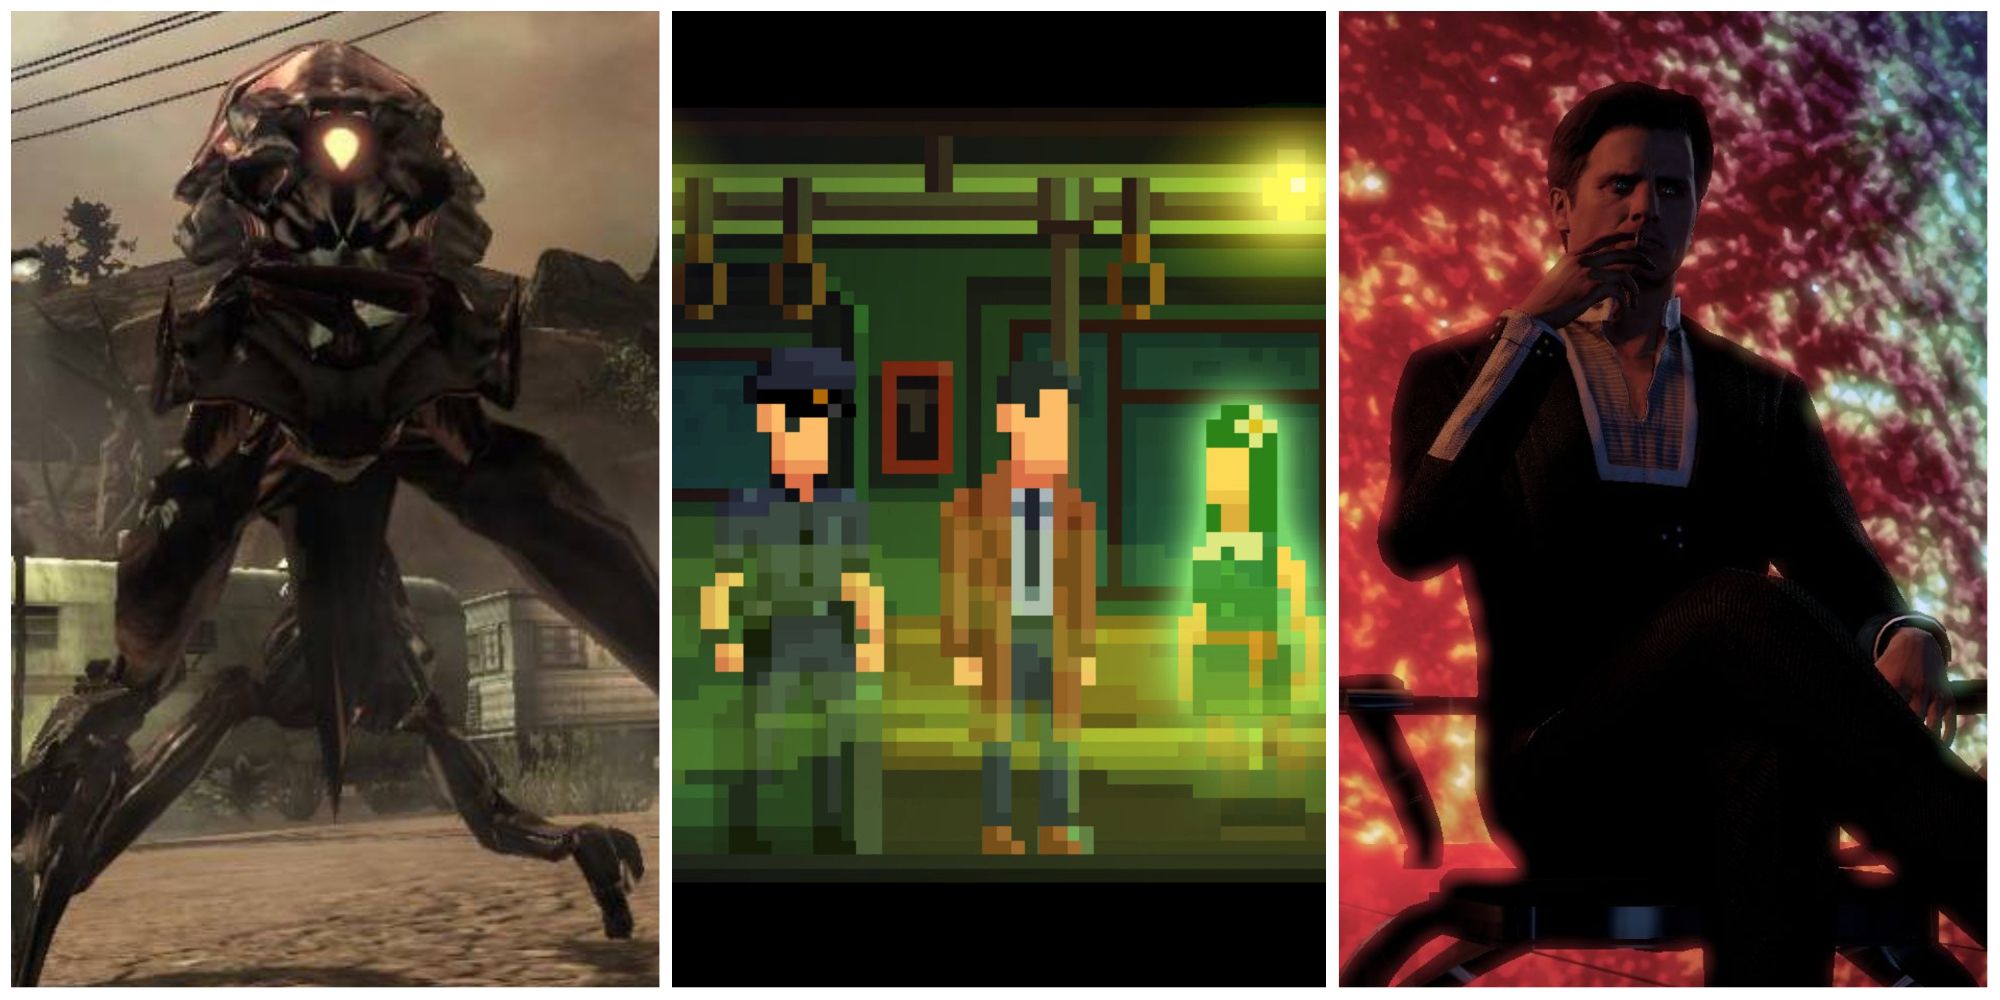 Left: An insectoid alien from BlackSite: Area 51. Middle: A police officer and a detective interrogating a ghost girl on a train in The Darkside Detective. Right: The Illusive Man from Mass Effect 2. Image sources: as.com and gamerant.com.